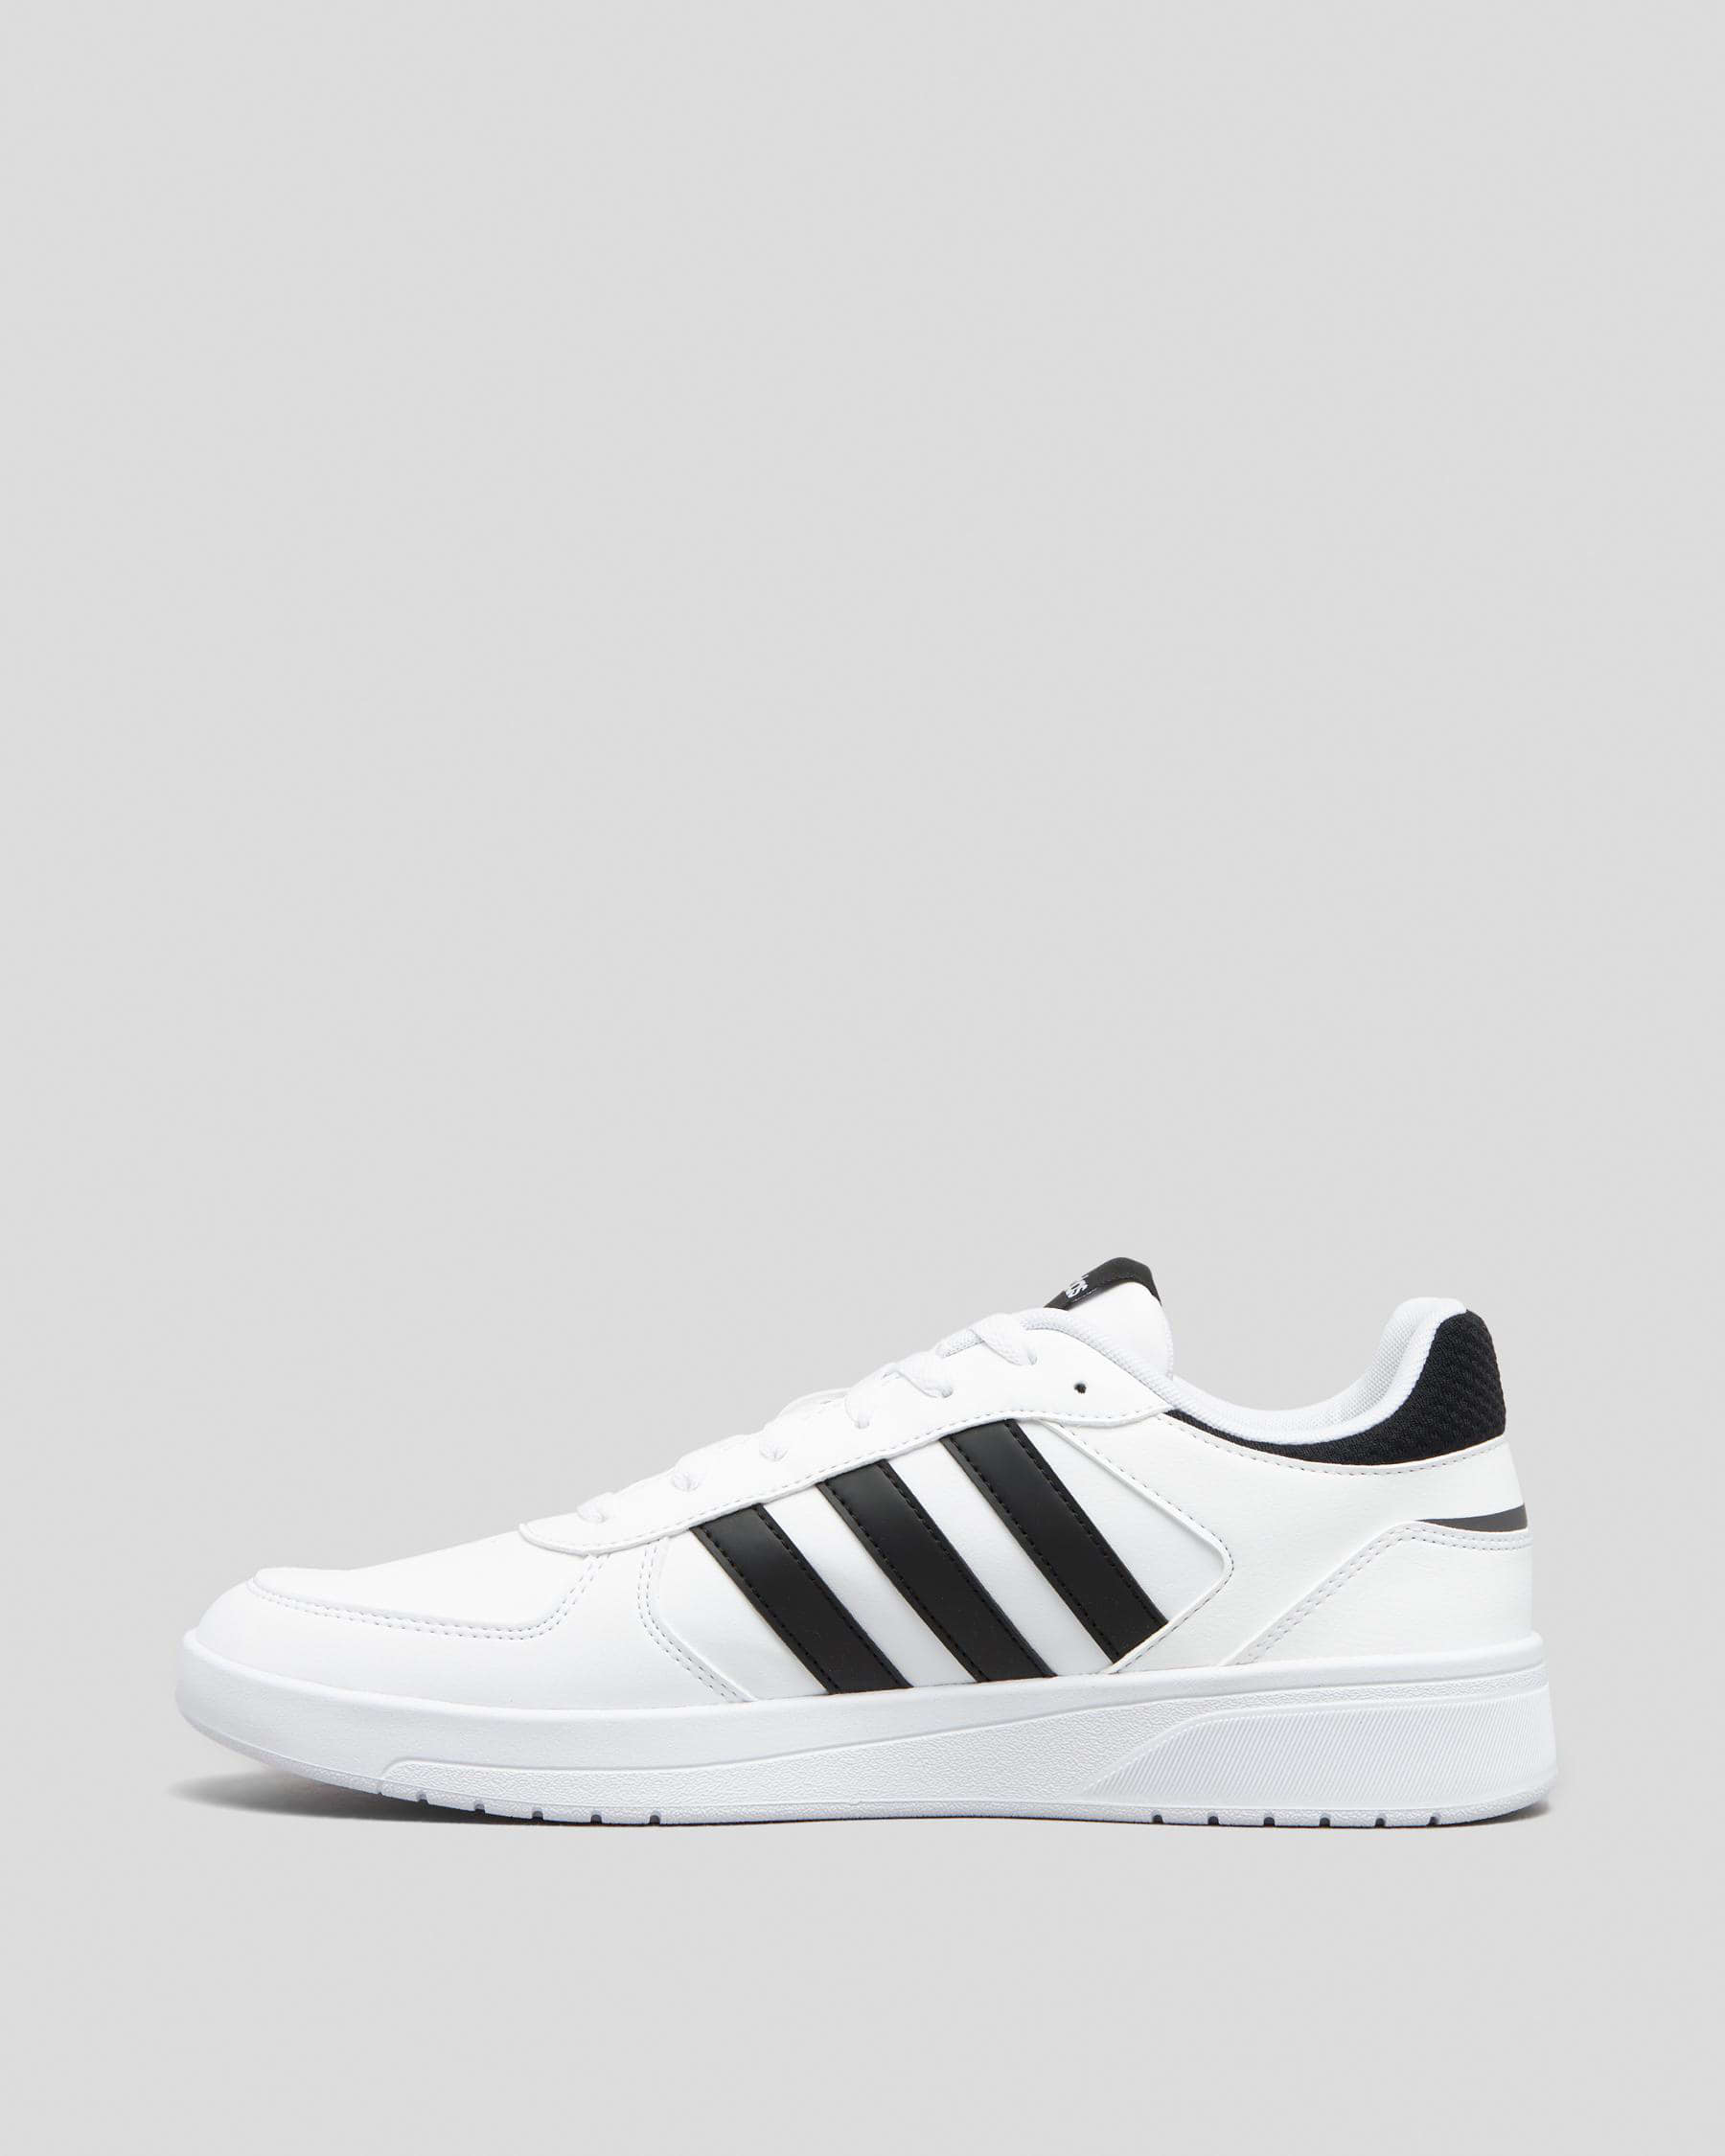 Shop adidas Courtbeat Shoes In Ftwr White/core Black/grey Five - Fast ...